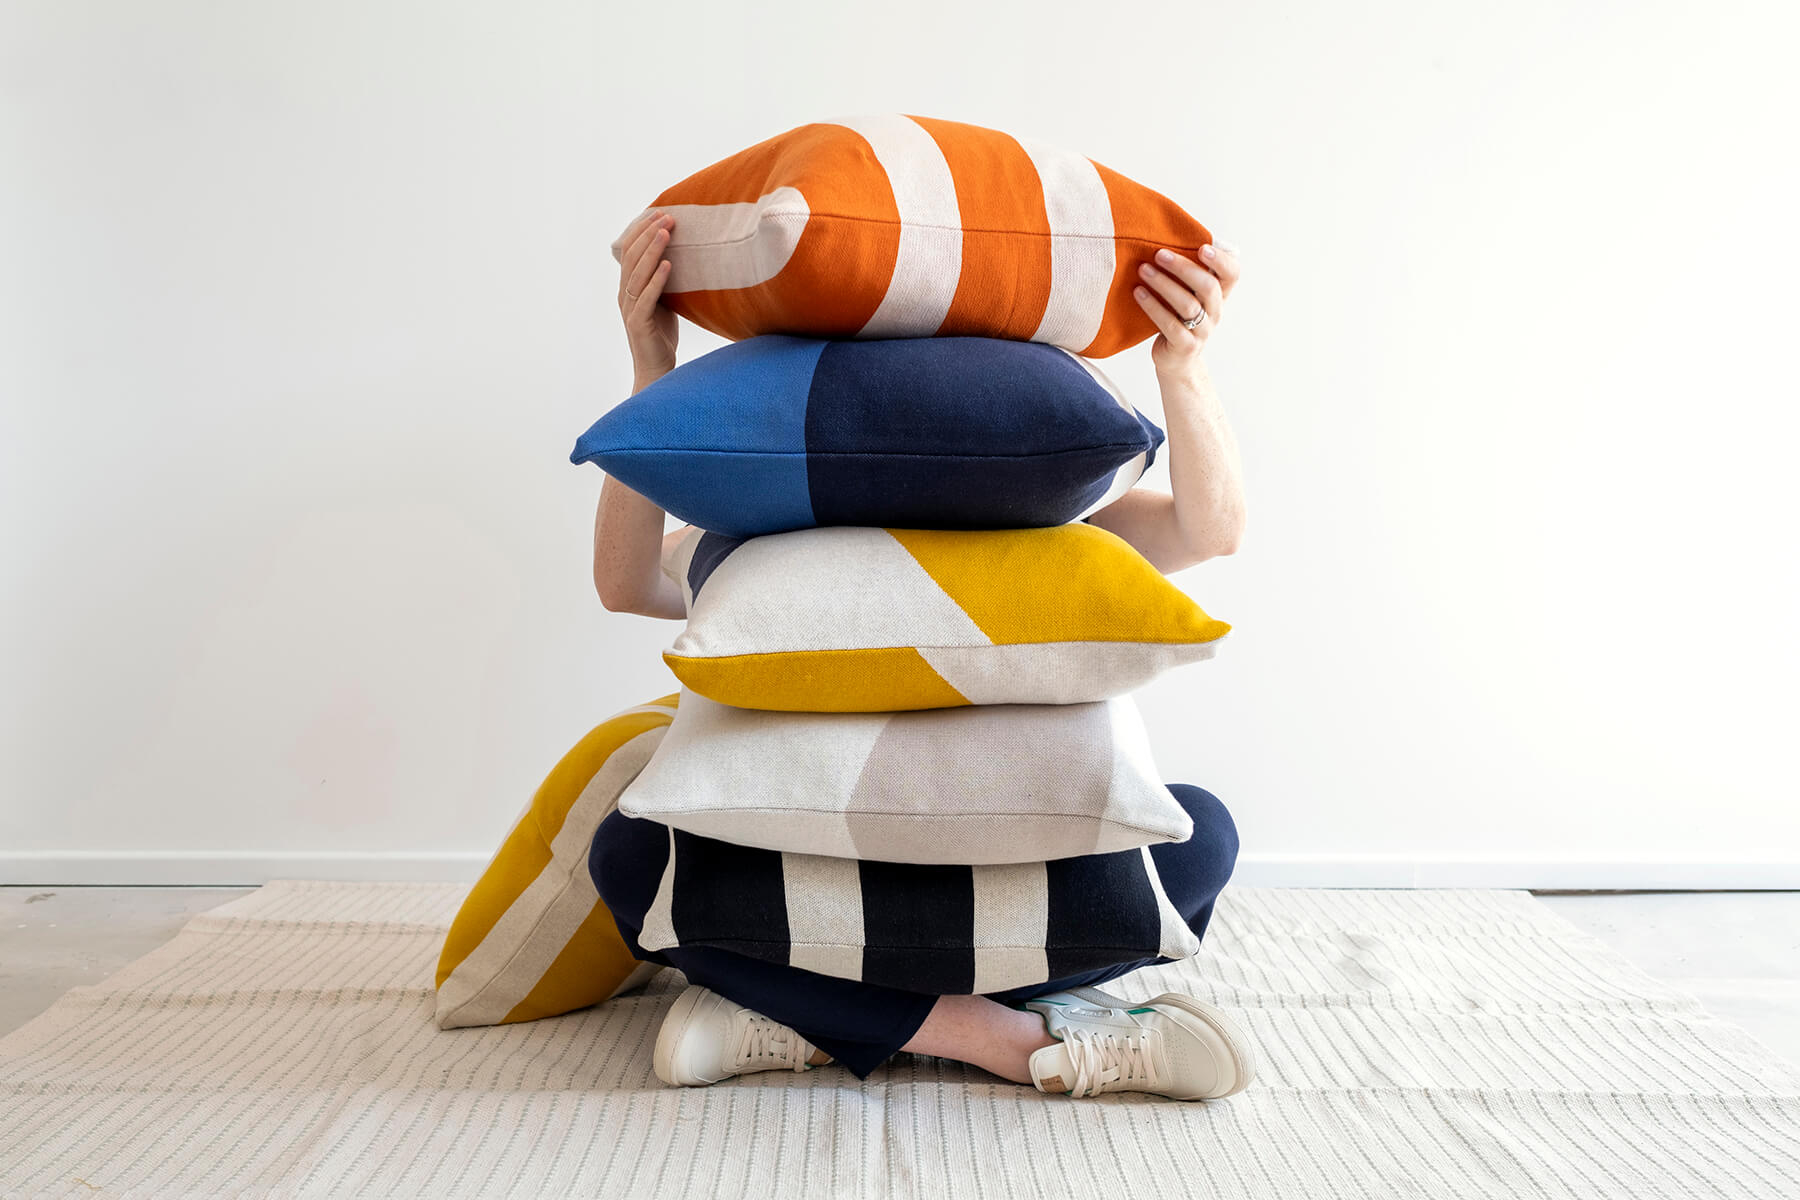 Sophie Home cushions stacked in front of a model